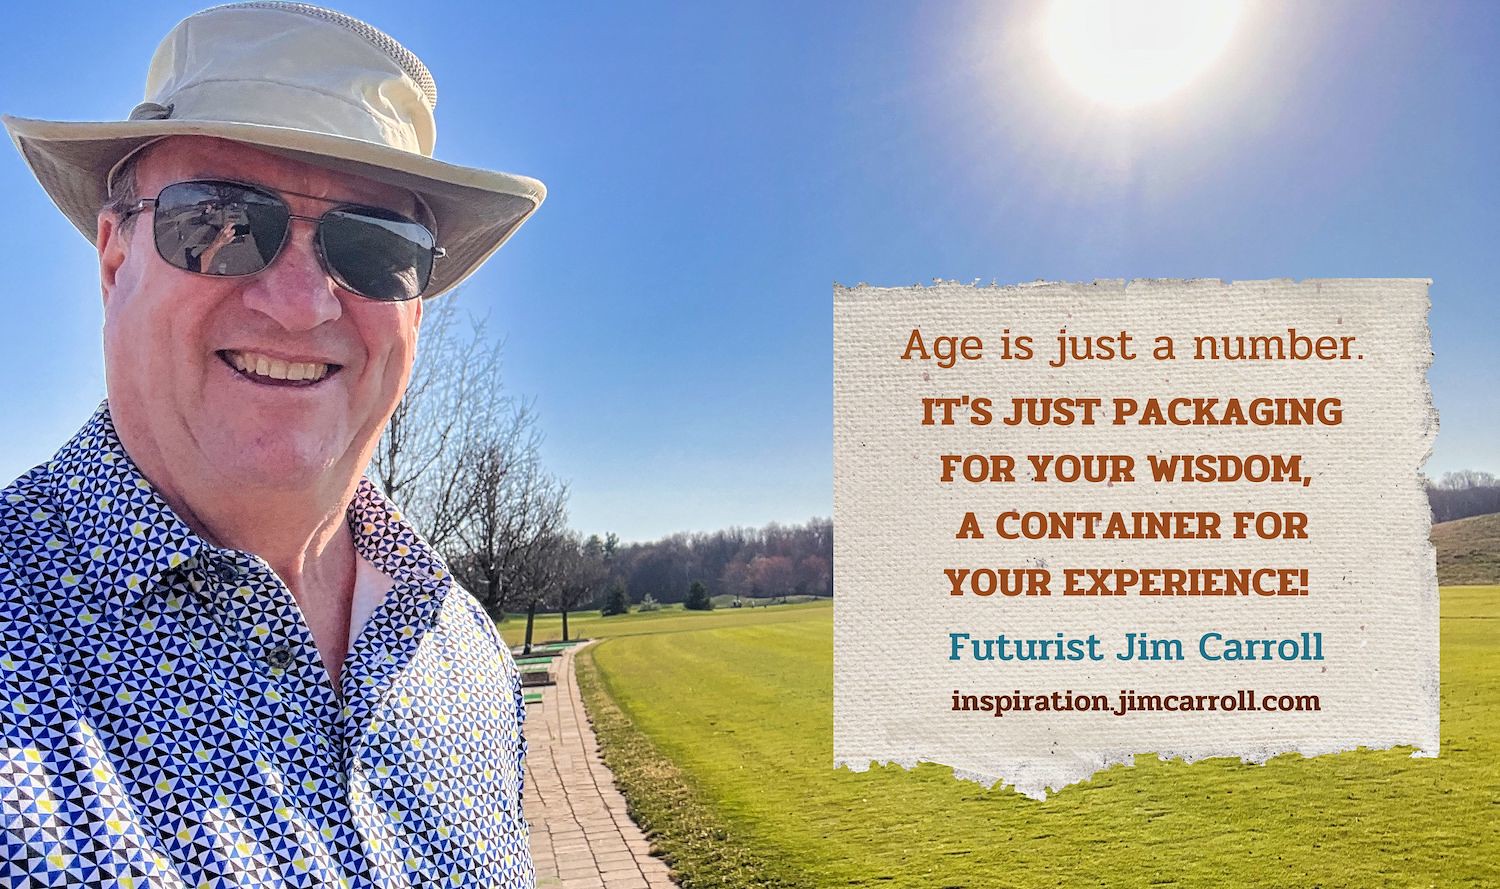 "Age is just a number. It's just packaging for your wisdom, a container for your experience!" - Futurist Jim Carroll